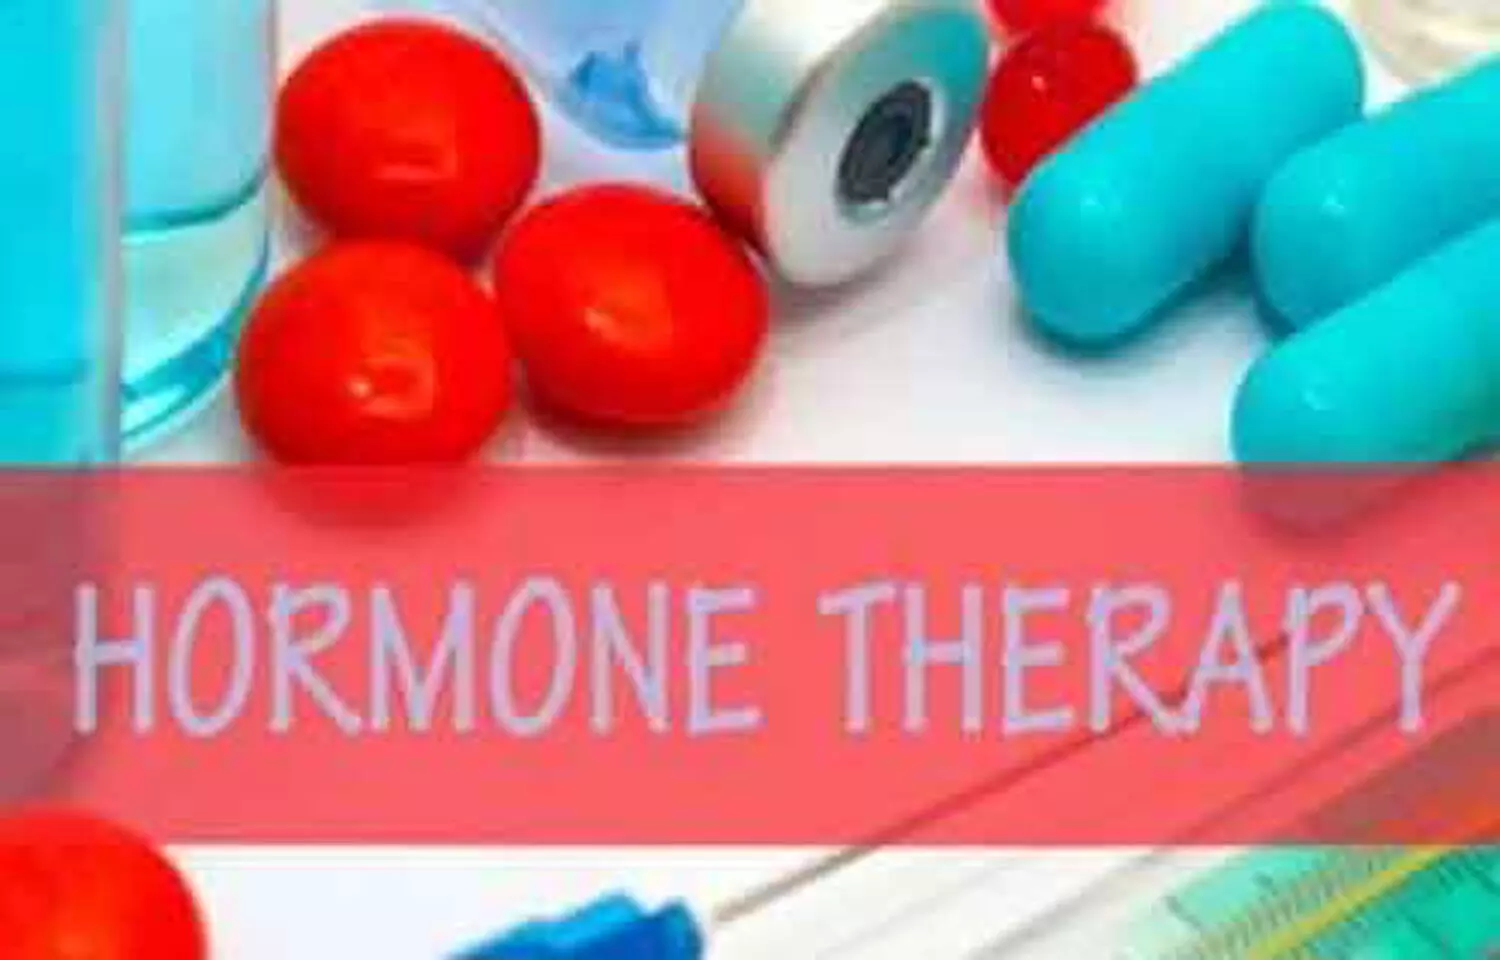 New hormone therapies for hot flashes offer enhanced benefits and minimized risk